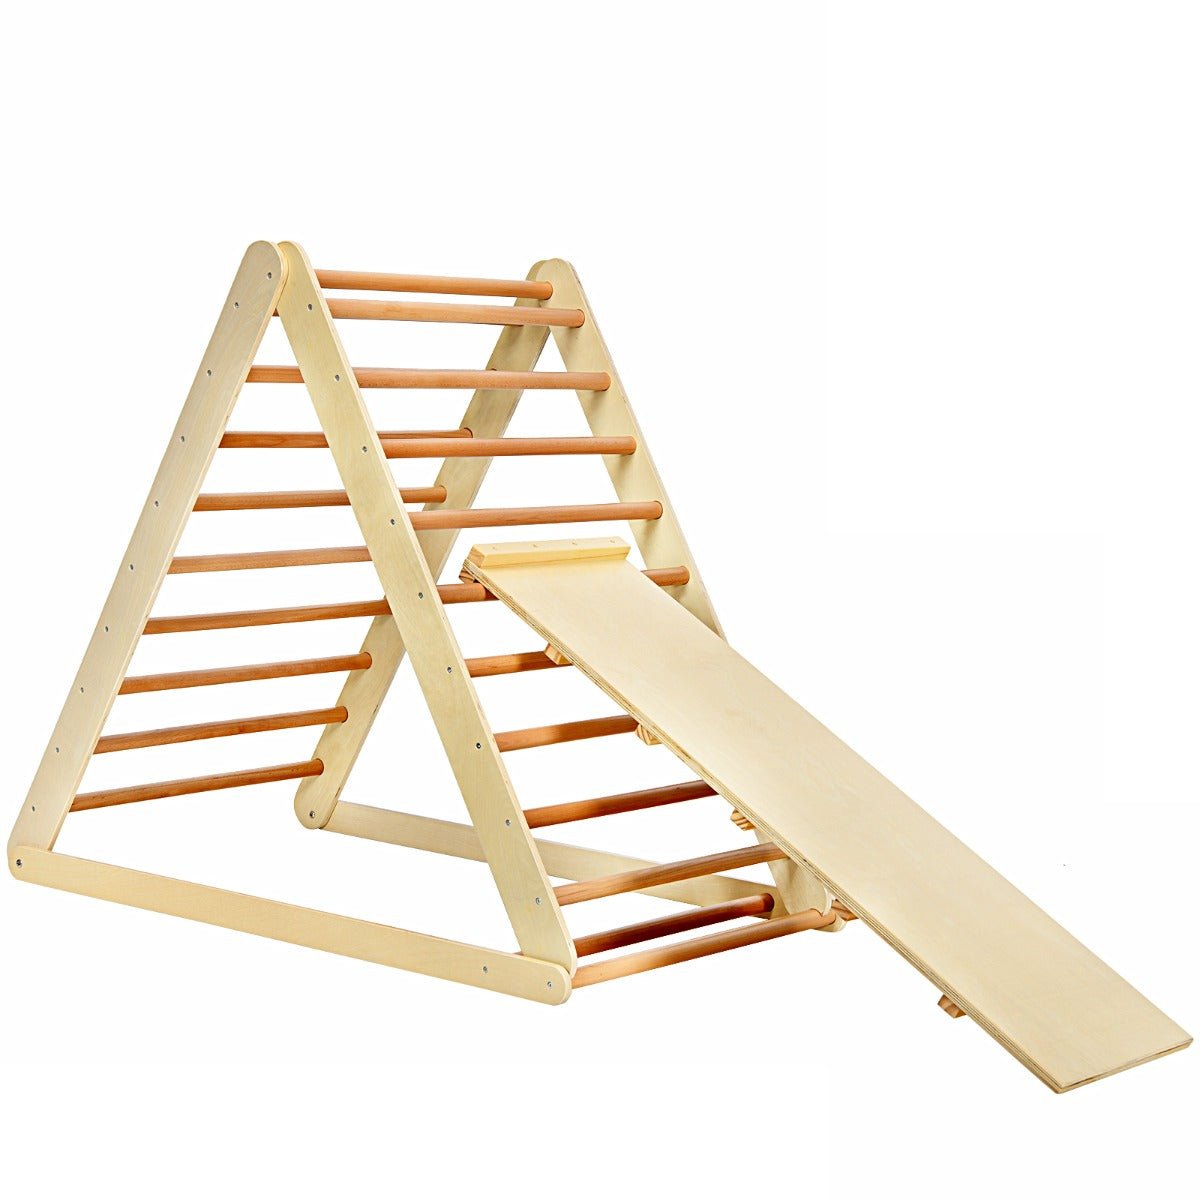 Secure Wooden Climbing Triangle Ladder - Natural Beauty with Safety Design